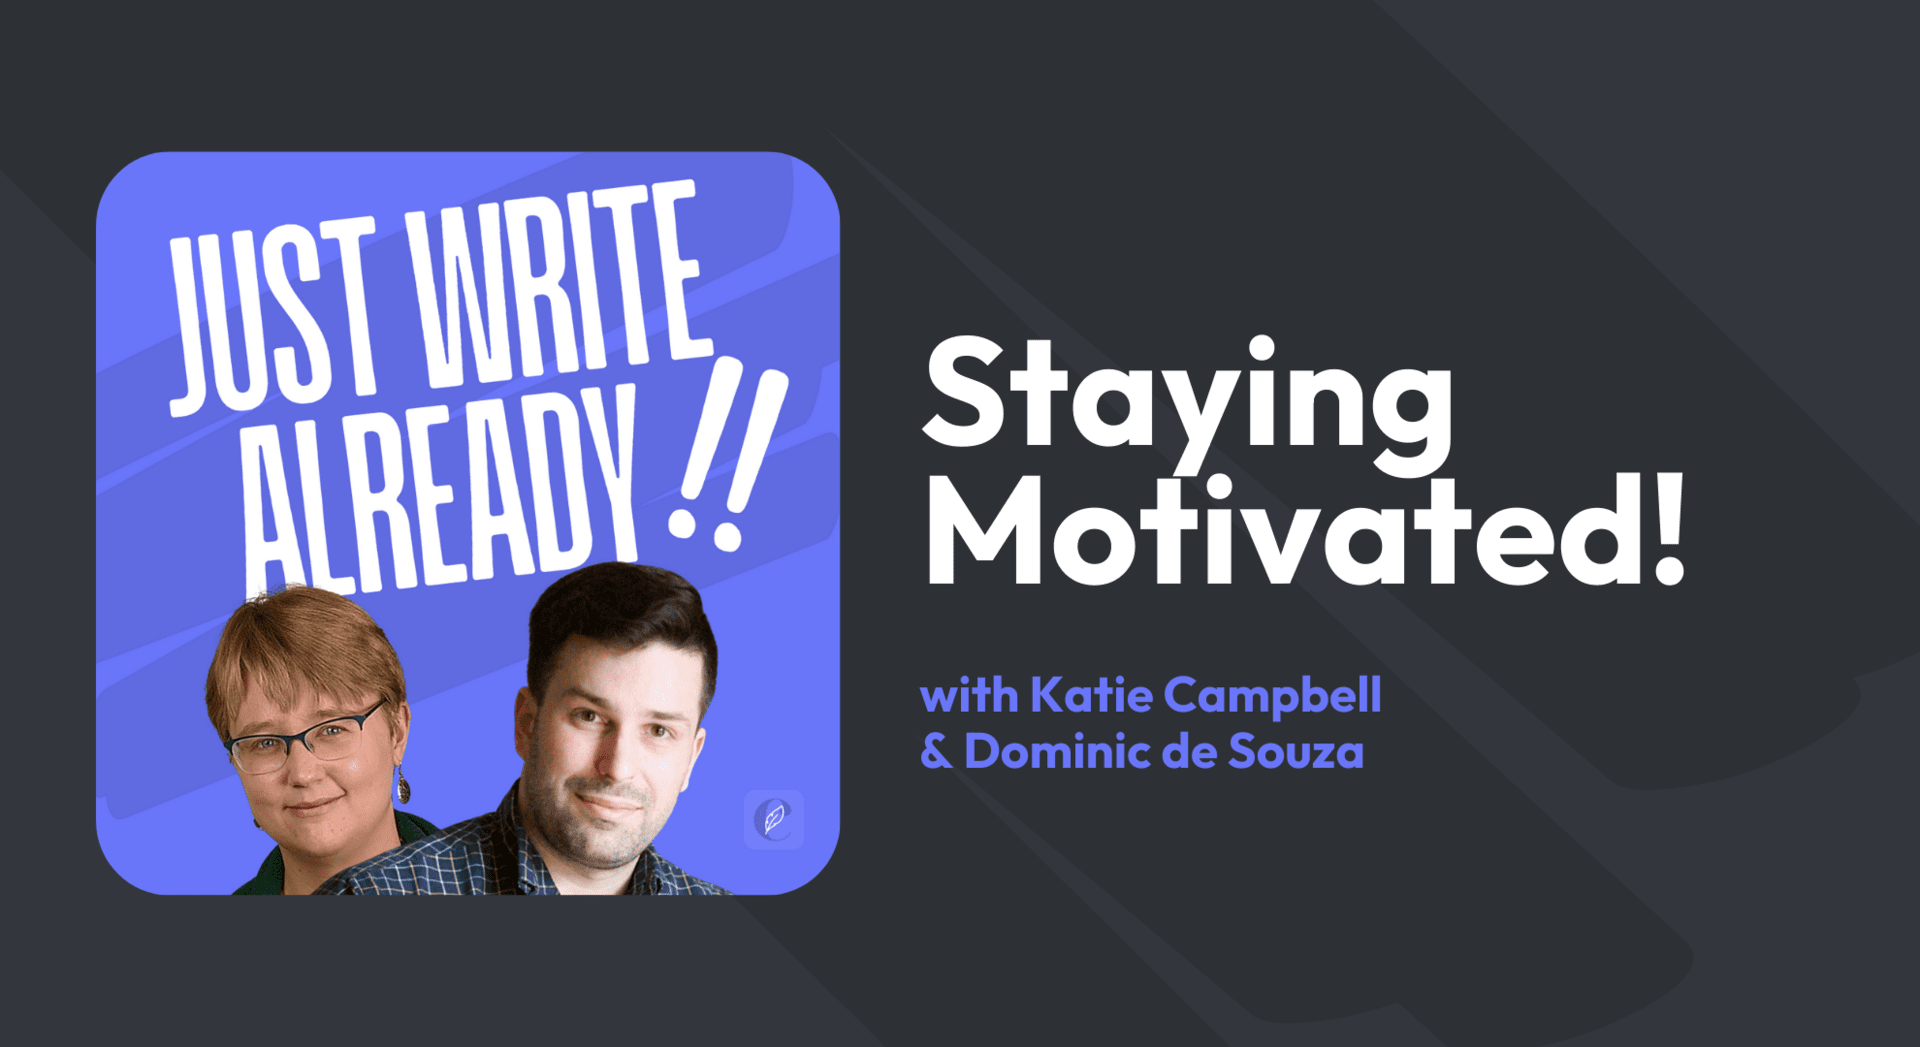 How to Keep Writing When Your Motivation Runs Dry